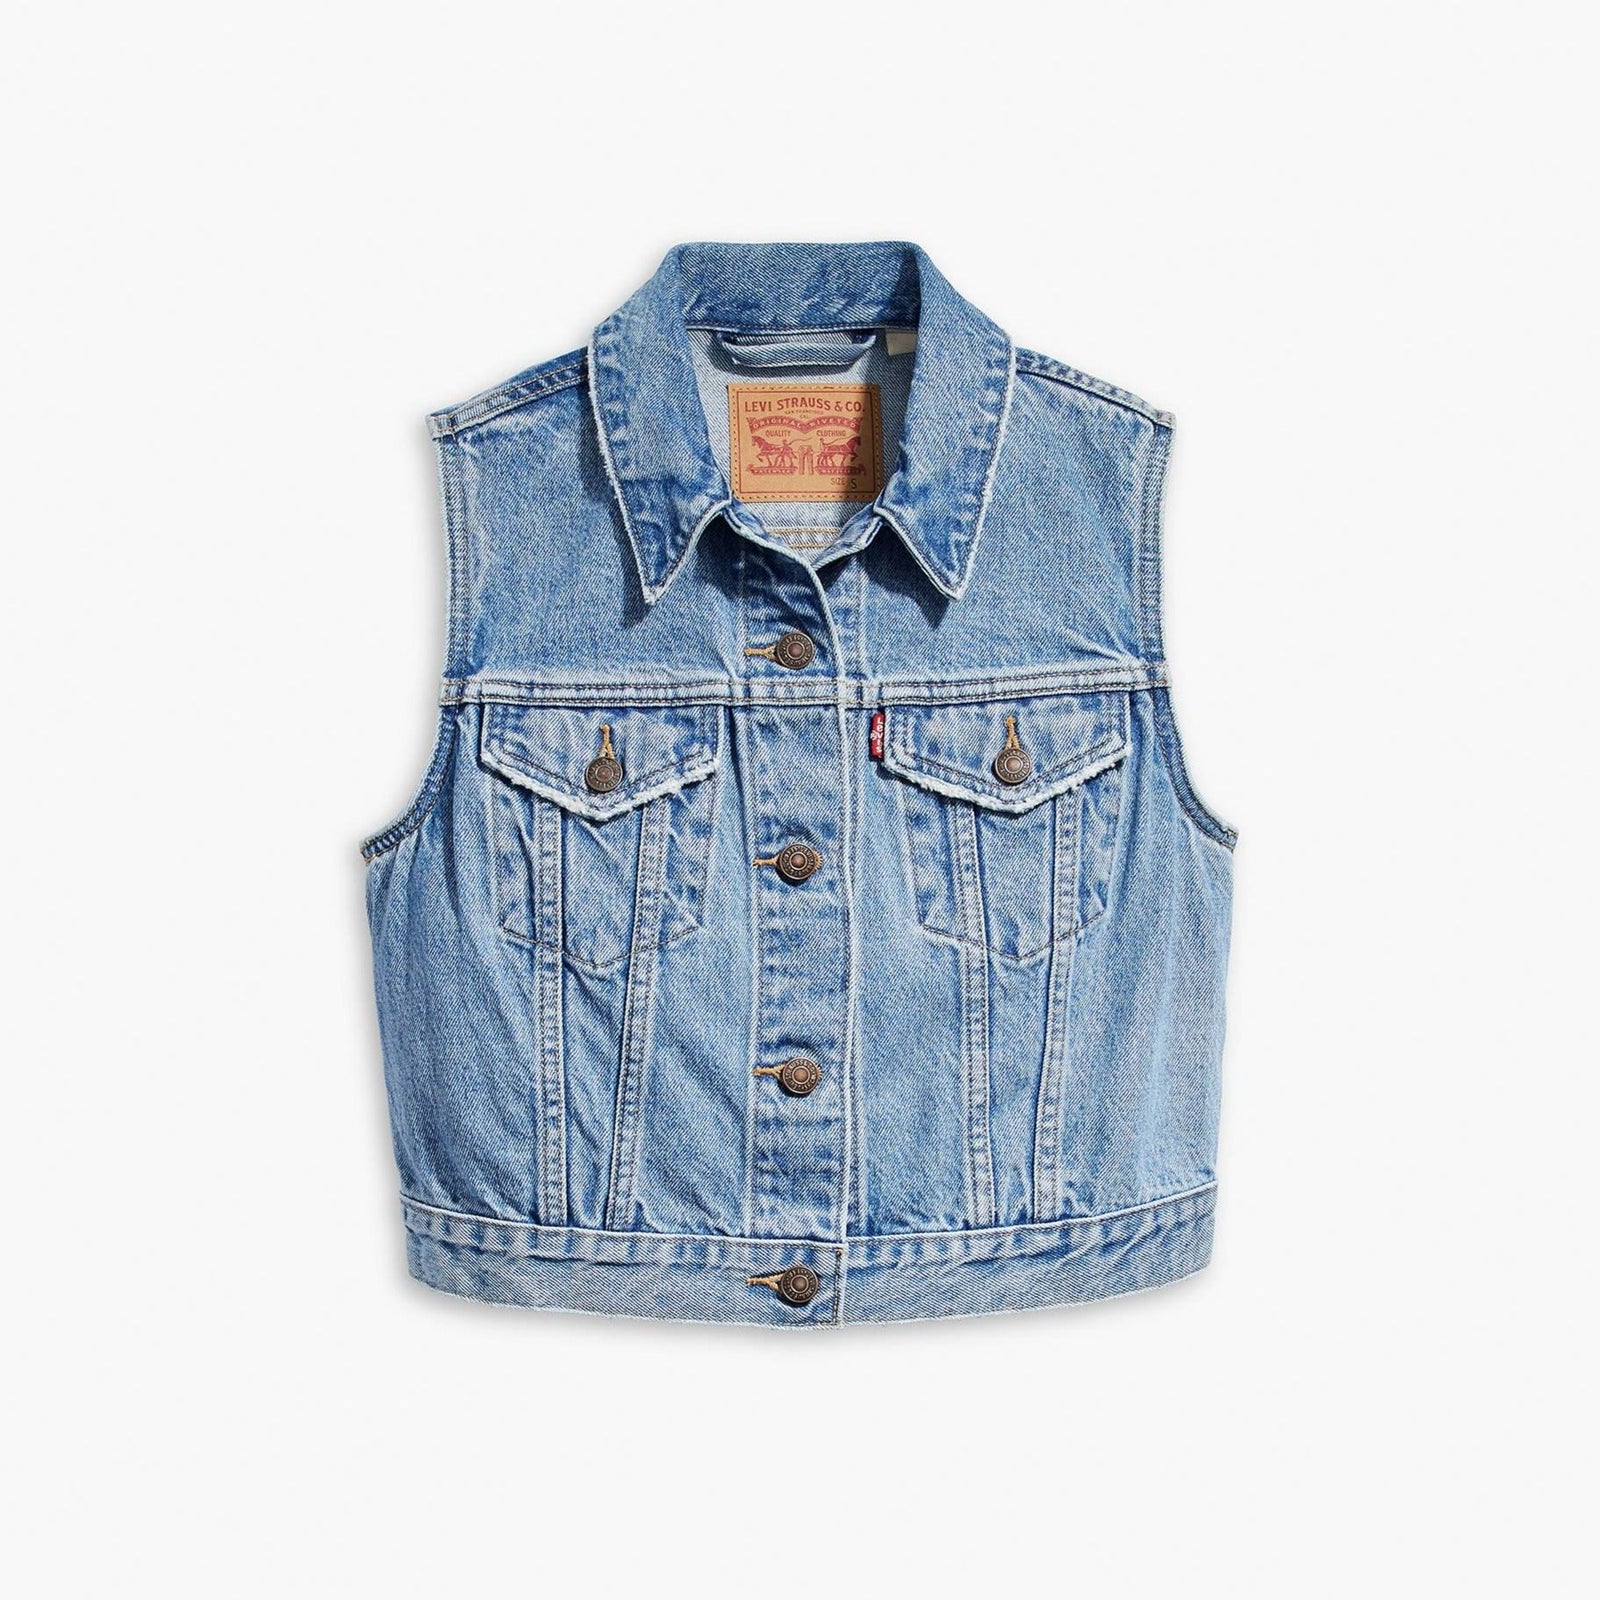 Levi's XS Vest in Old Notes Blue